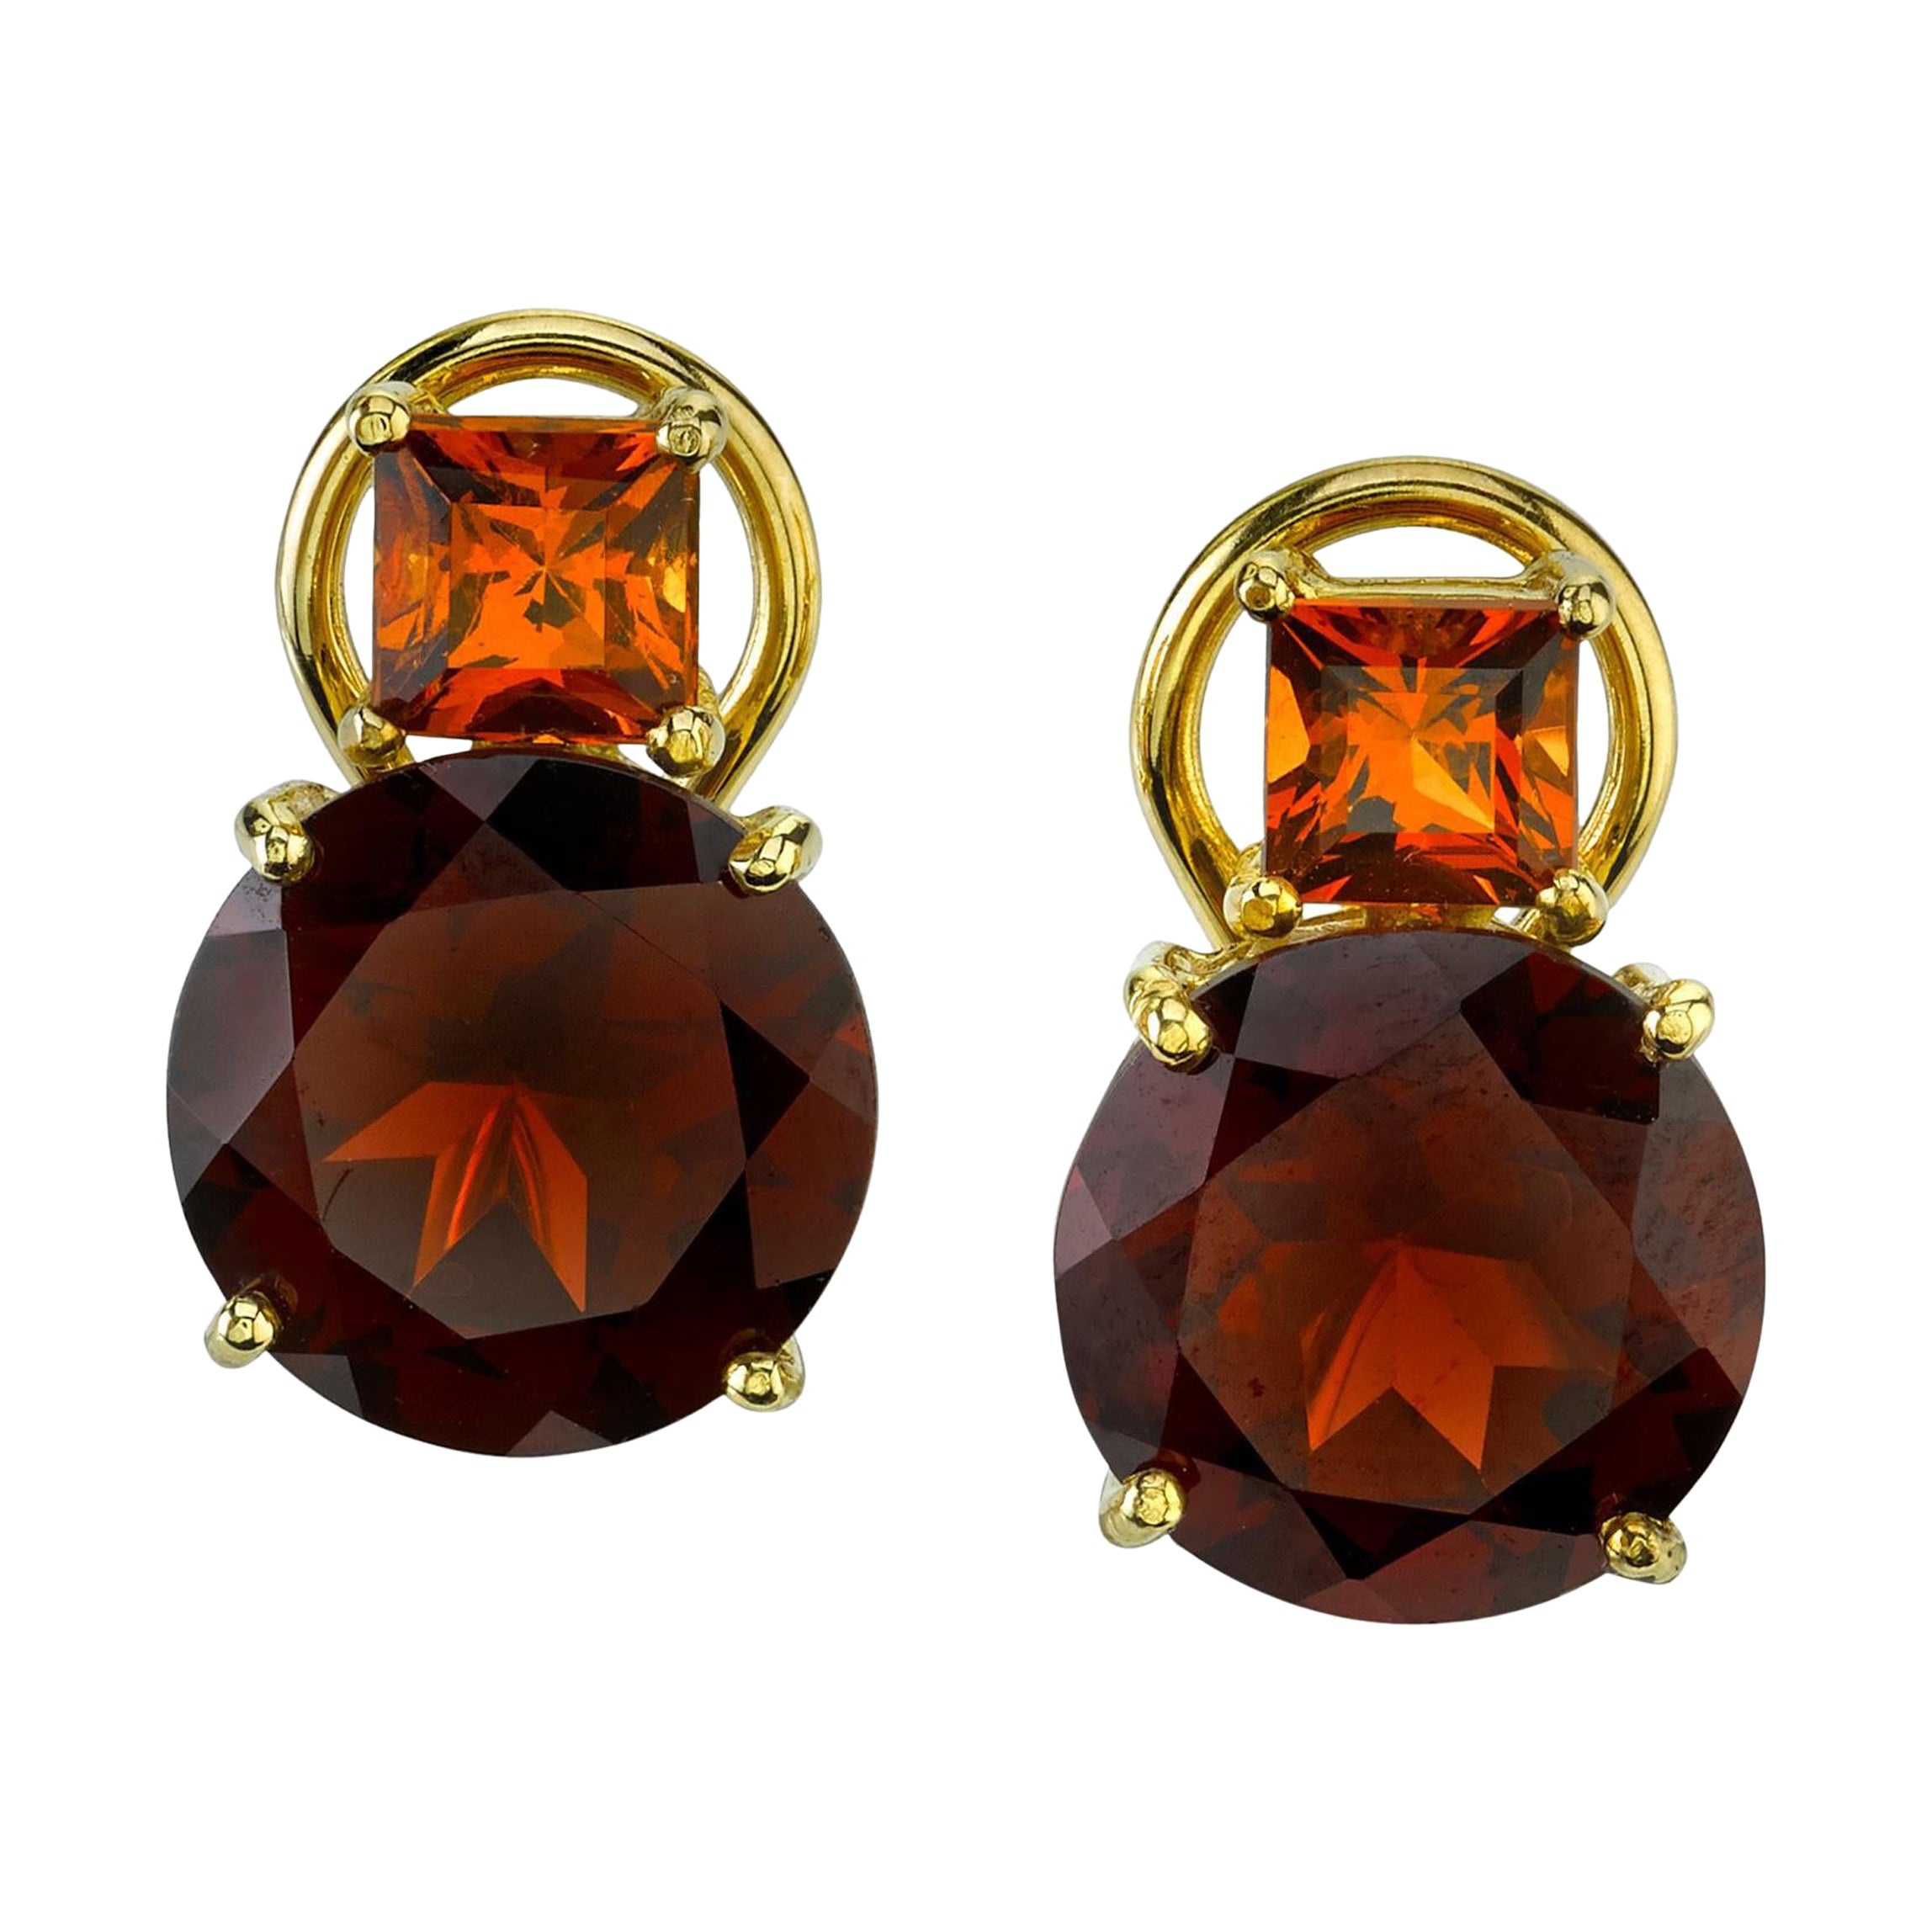 Hessonite and Almandite Garnet Earrings in 18K Yellow Gold, 9.44 Carats Total For Sale